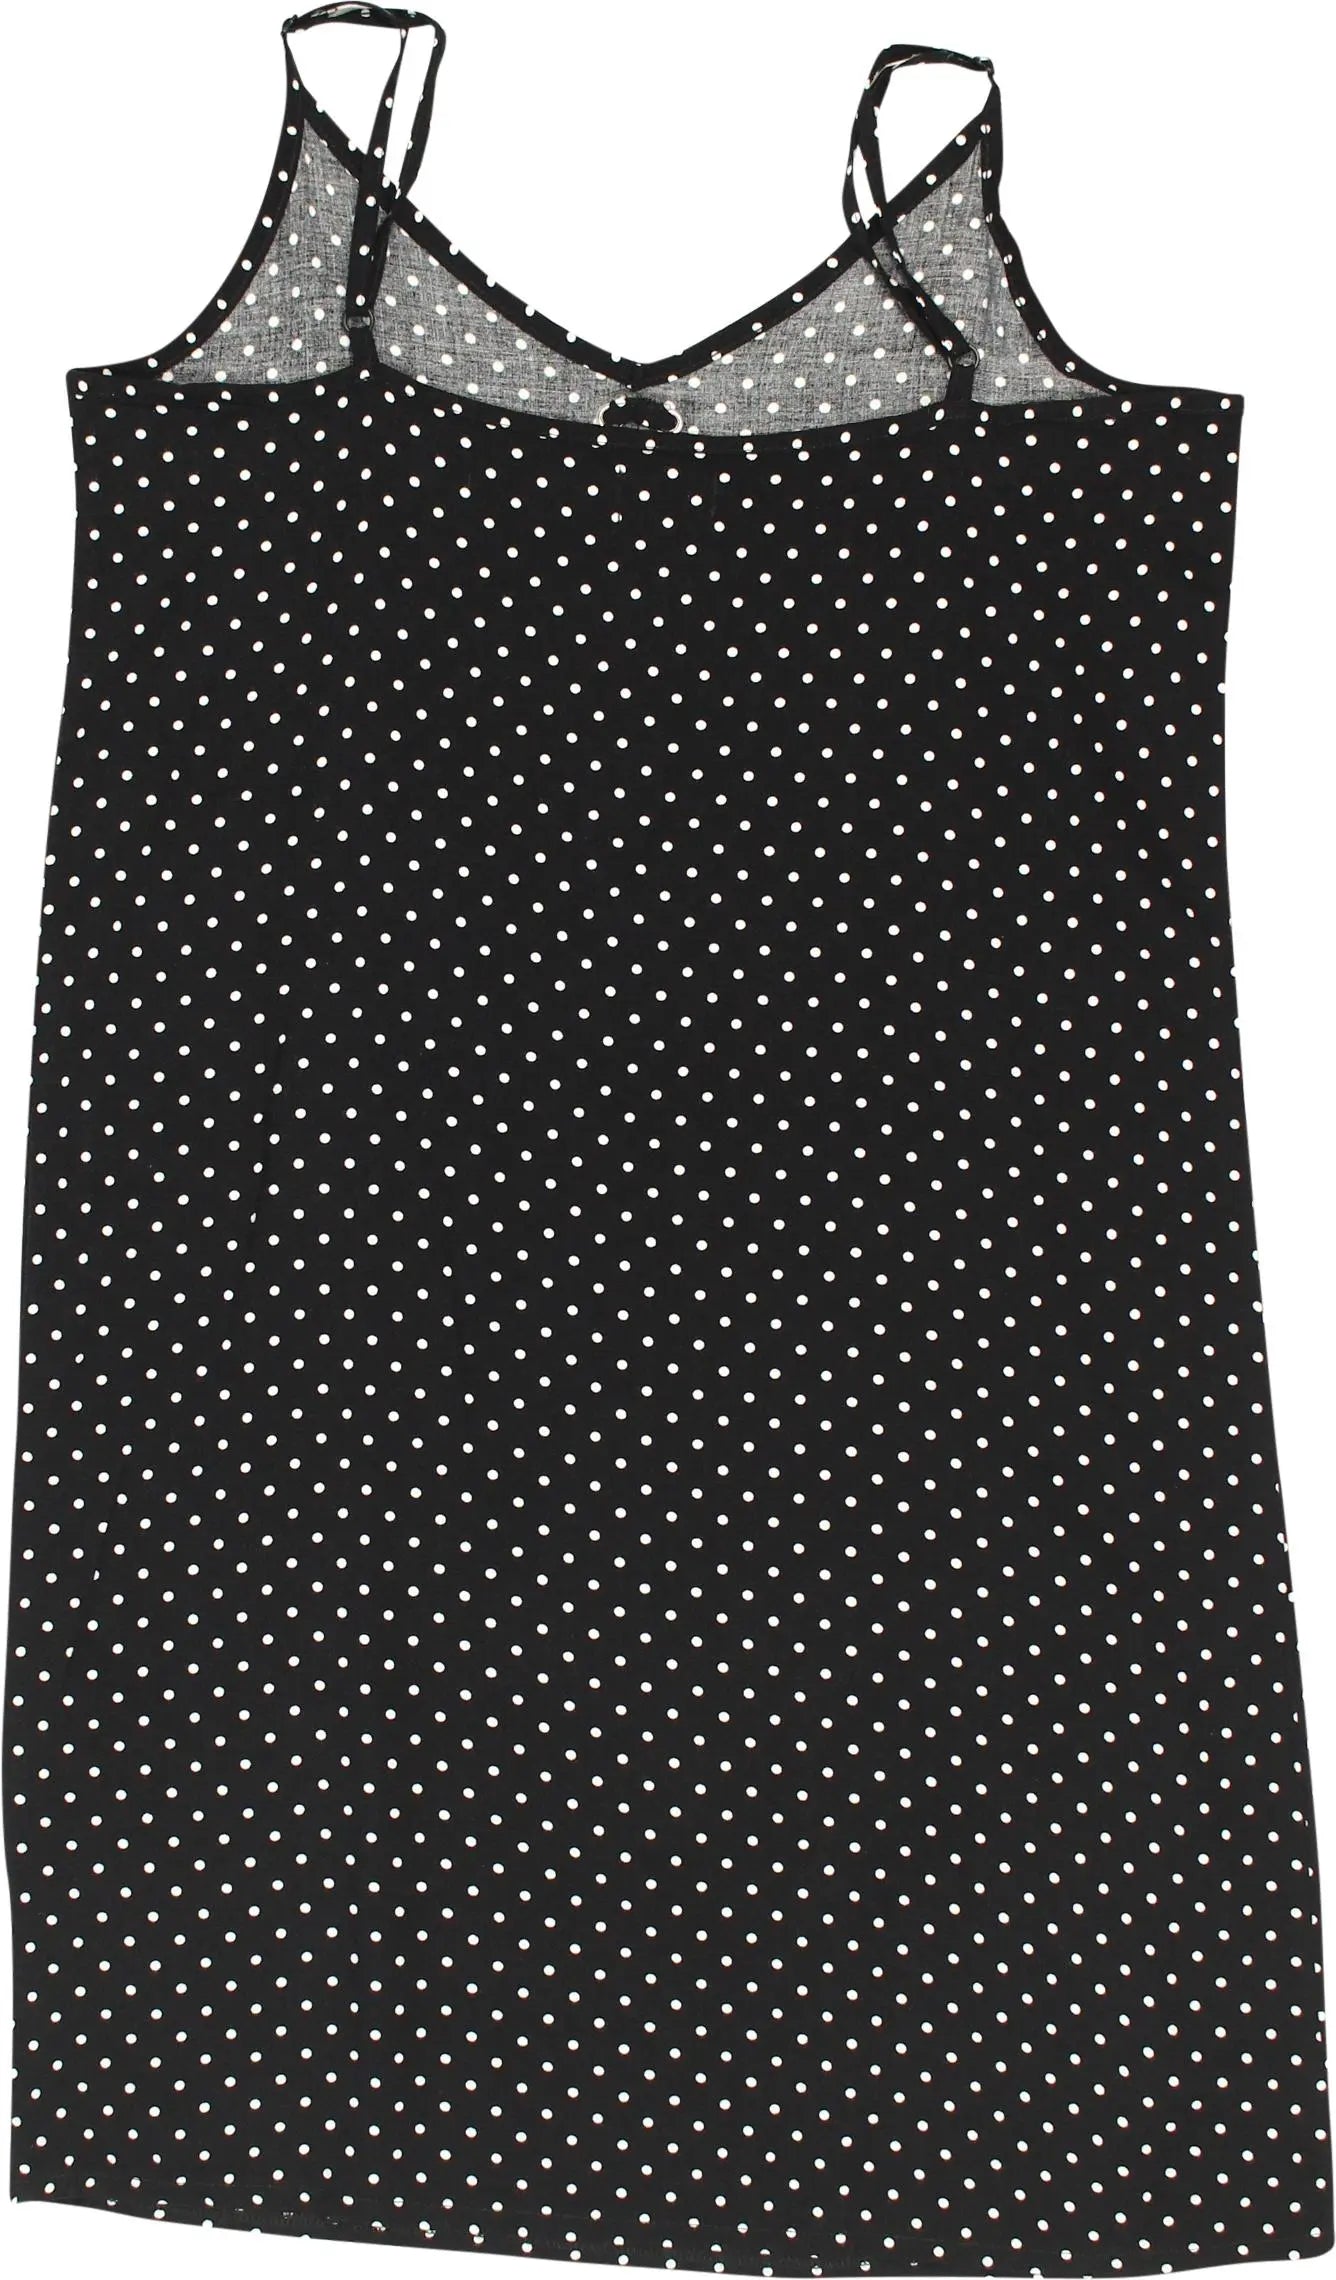 Seven Sisters - Polka Dot Dress- ThriftTale.com - Vintage and second handclothing